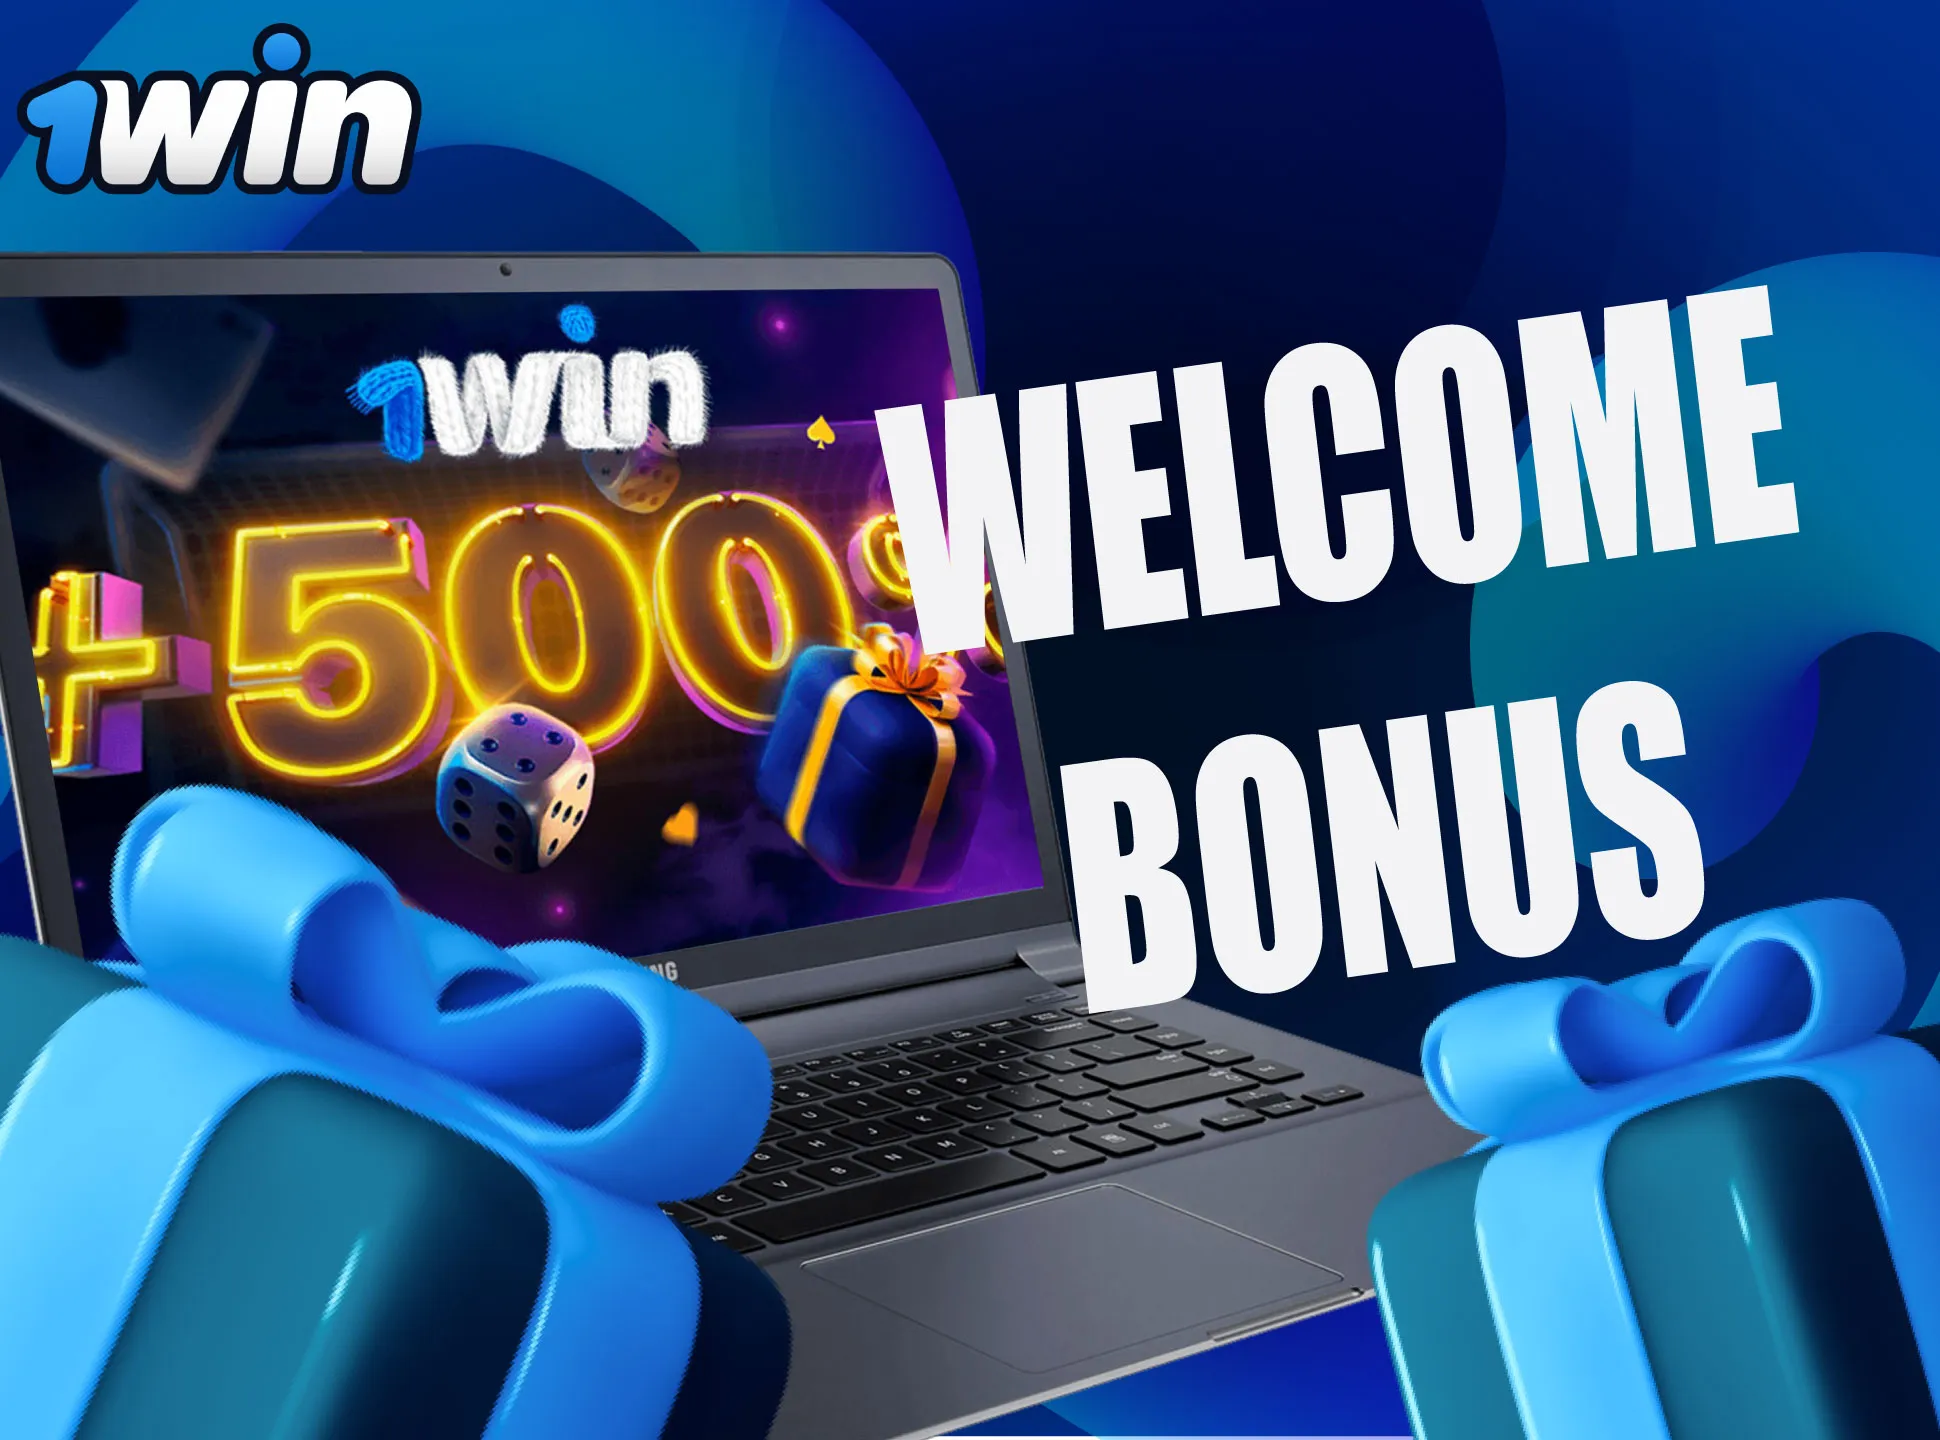 Make the first deposit to get free spins as a welcome bonus from 1win.